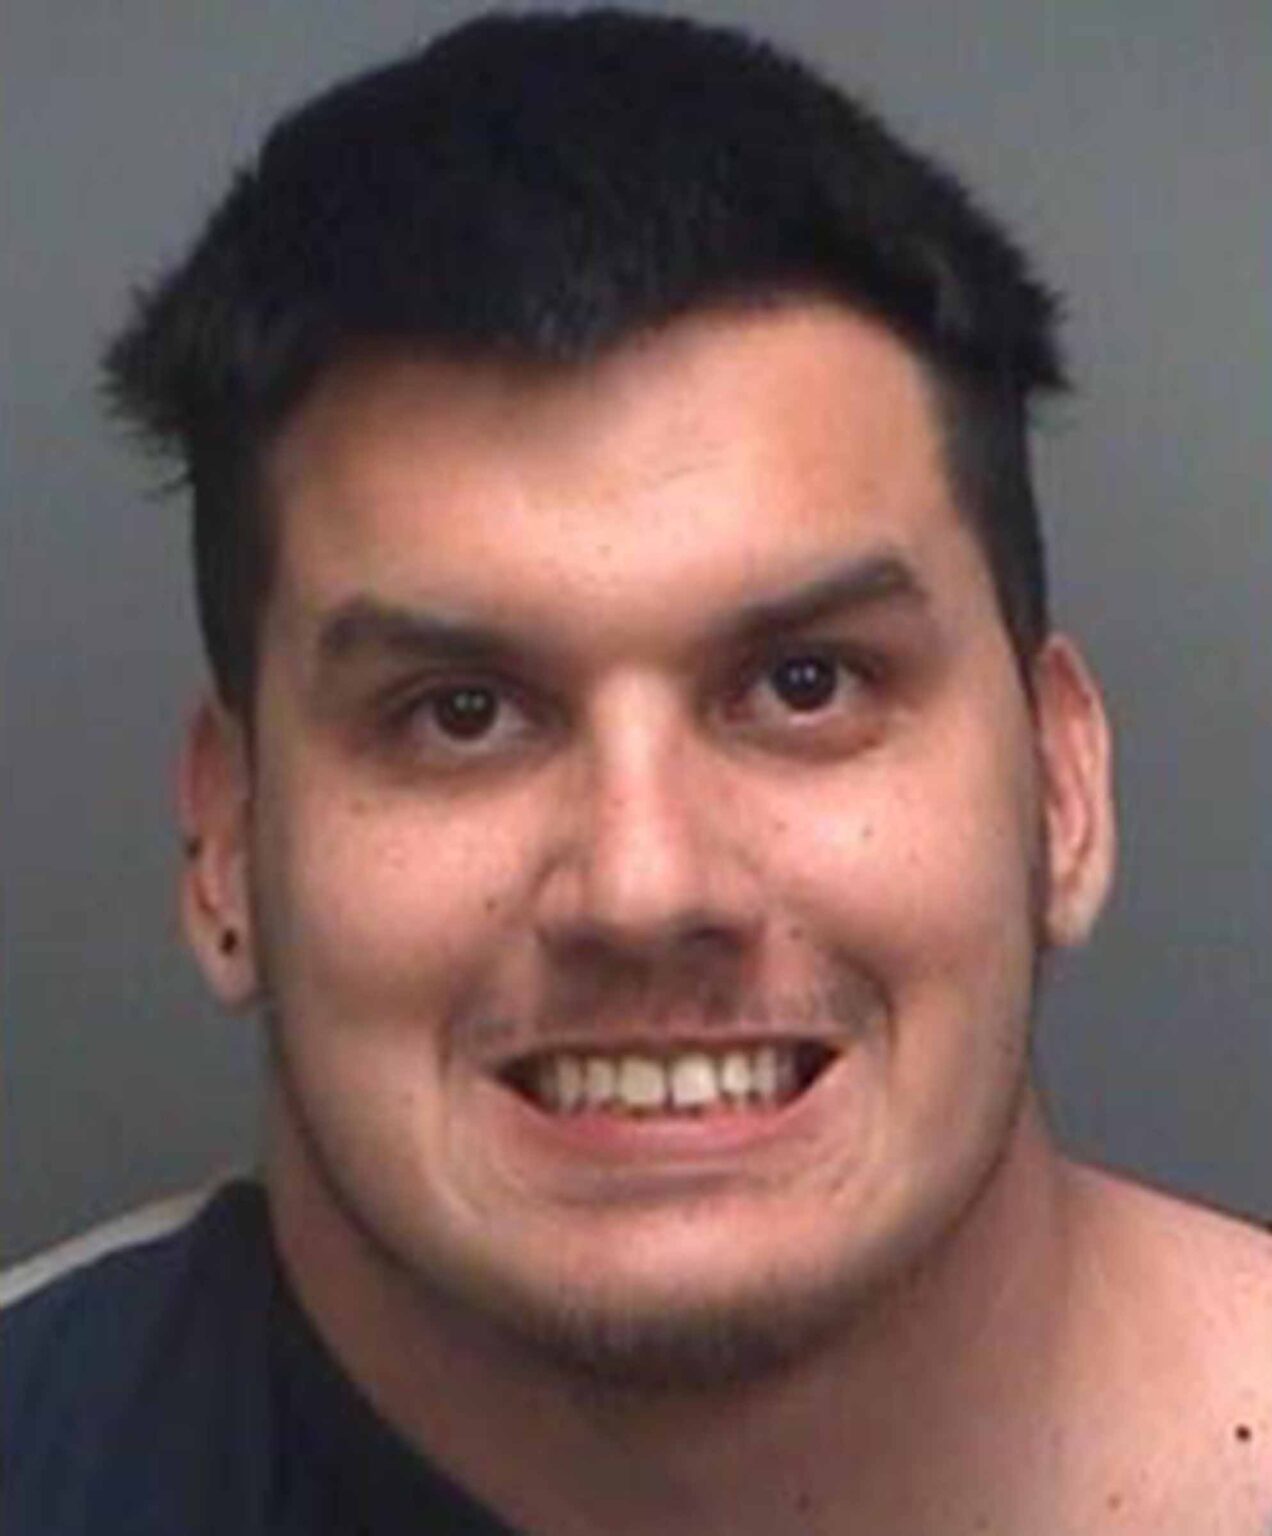 Oh, Florida Man, why must you waste law enforcement’s time? Here are our favorite Florida Man memes: crime edition.